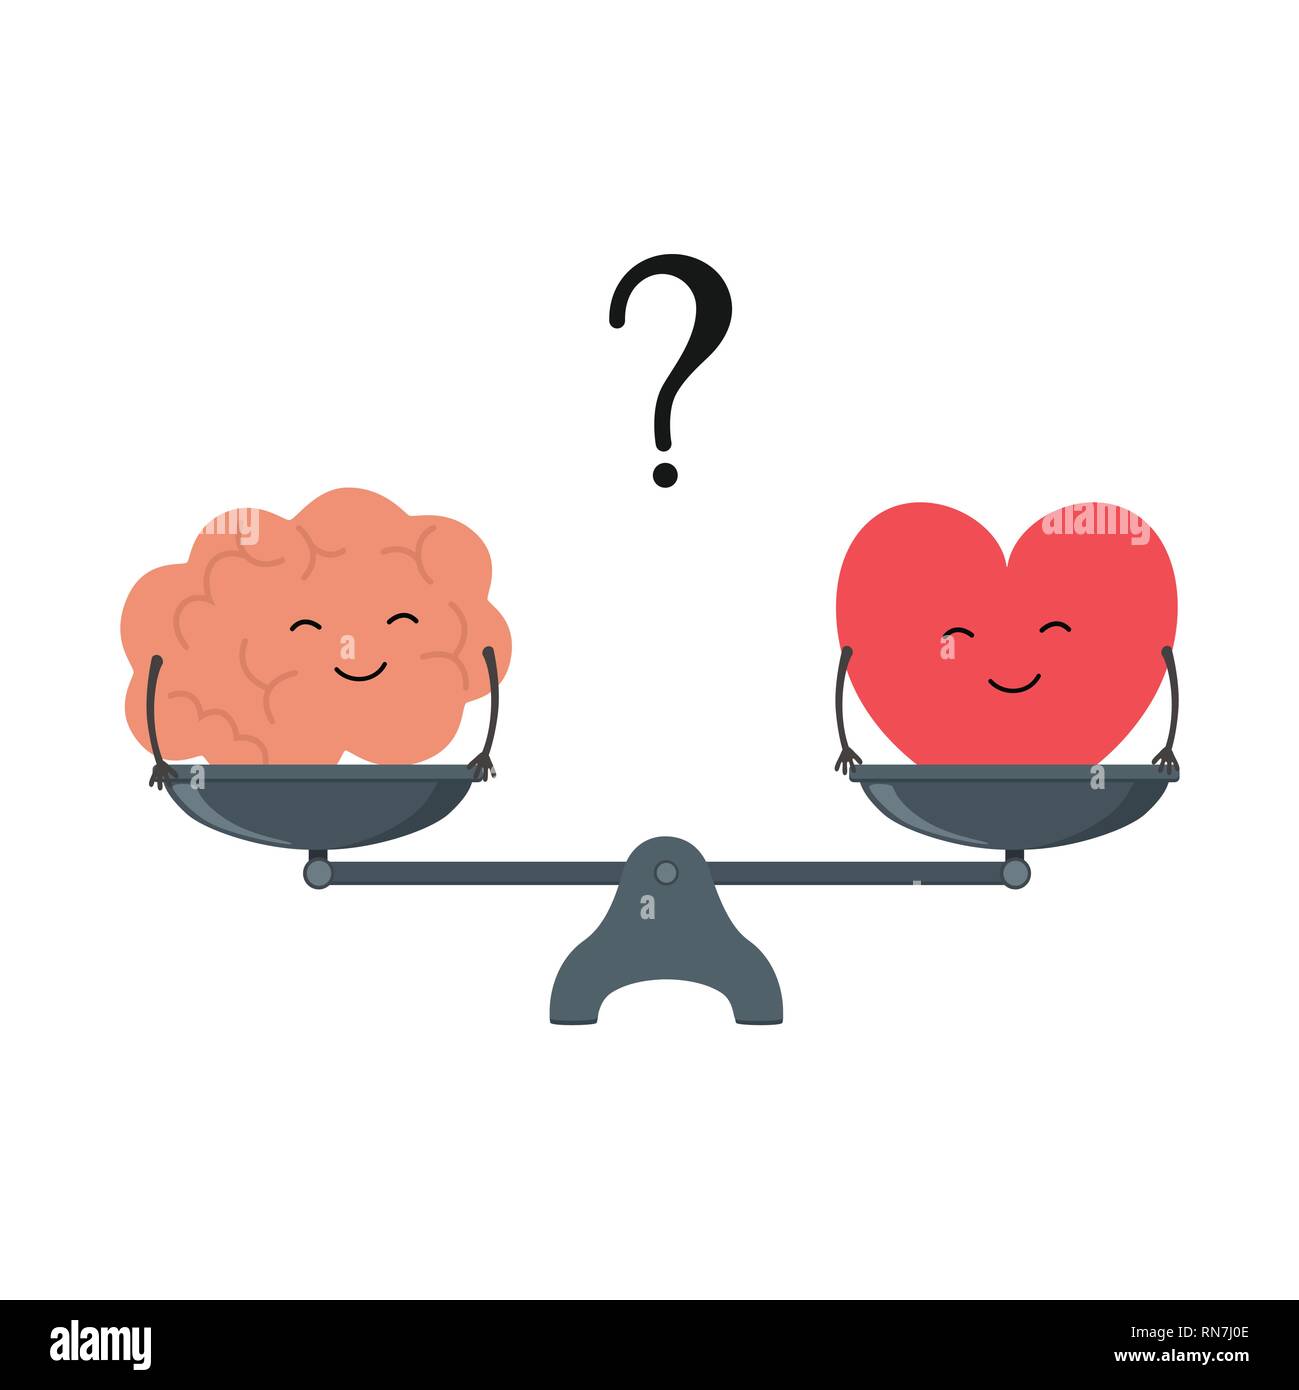 https://c8.alamy.com/comp/RN7J0E/illustration-of-the-concept-of-balance-between-logic-and-emotion-cartoon-brain-and-heart-with-cute-faces-on-a-scale-heart-or-mind-vector-RN7J0E.jpg